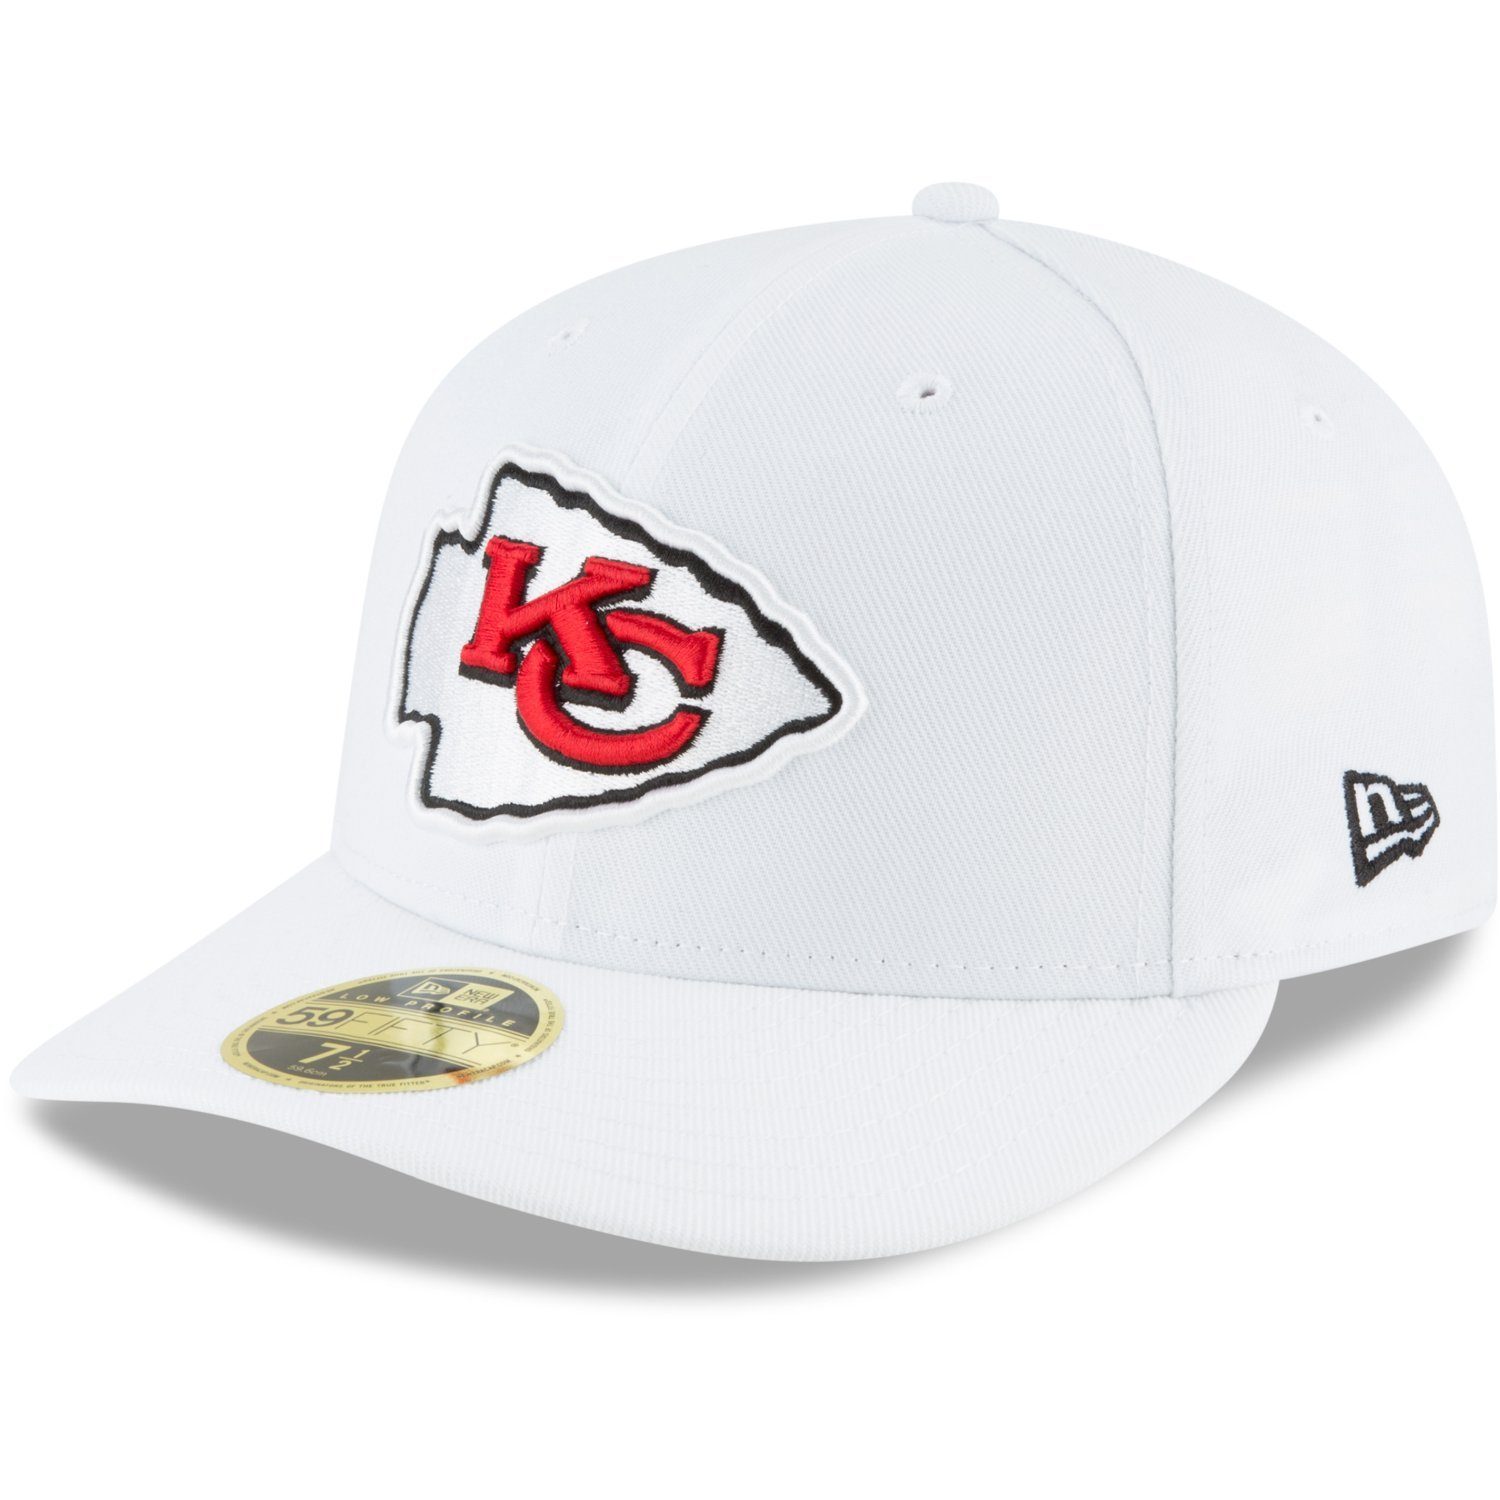 Profile City Cap Low Kansas Era Chiefs New Fitted 59Fifty